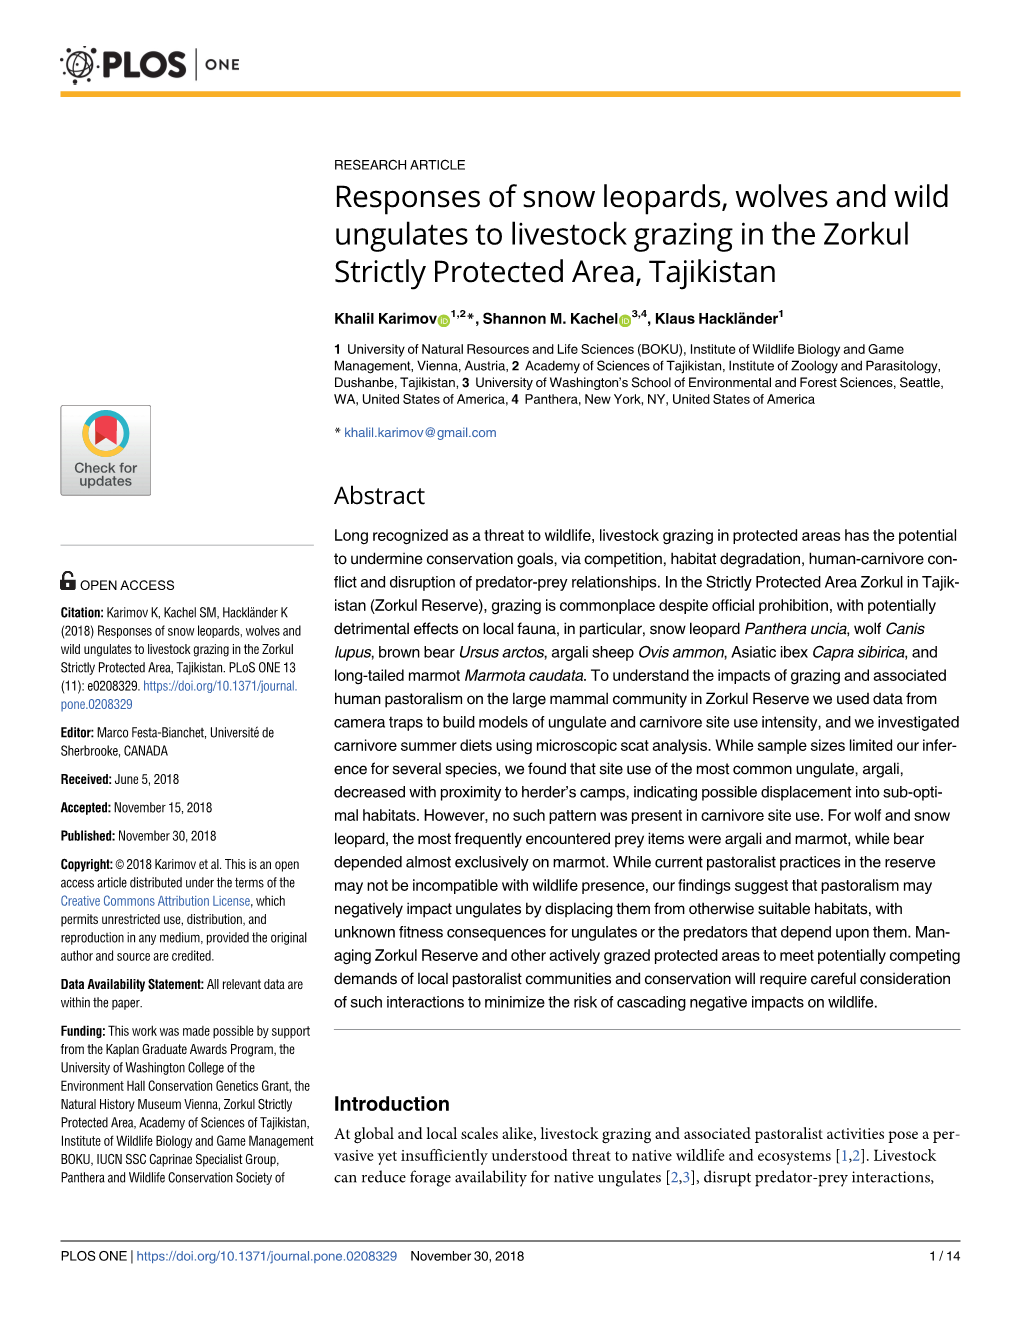 Responses of Snow Leopards, Wolves and Wild Ungulates to Livestock Grazing in the Zorkul Strictly Protected Area, Tajikistan